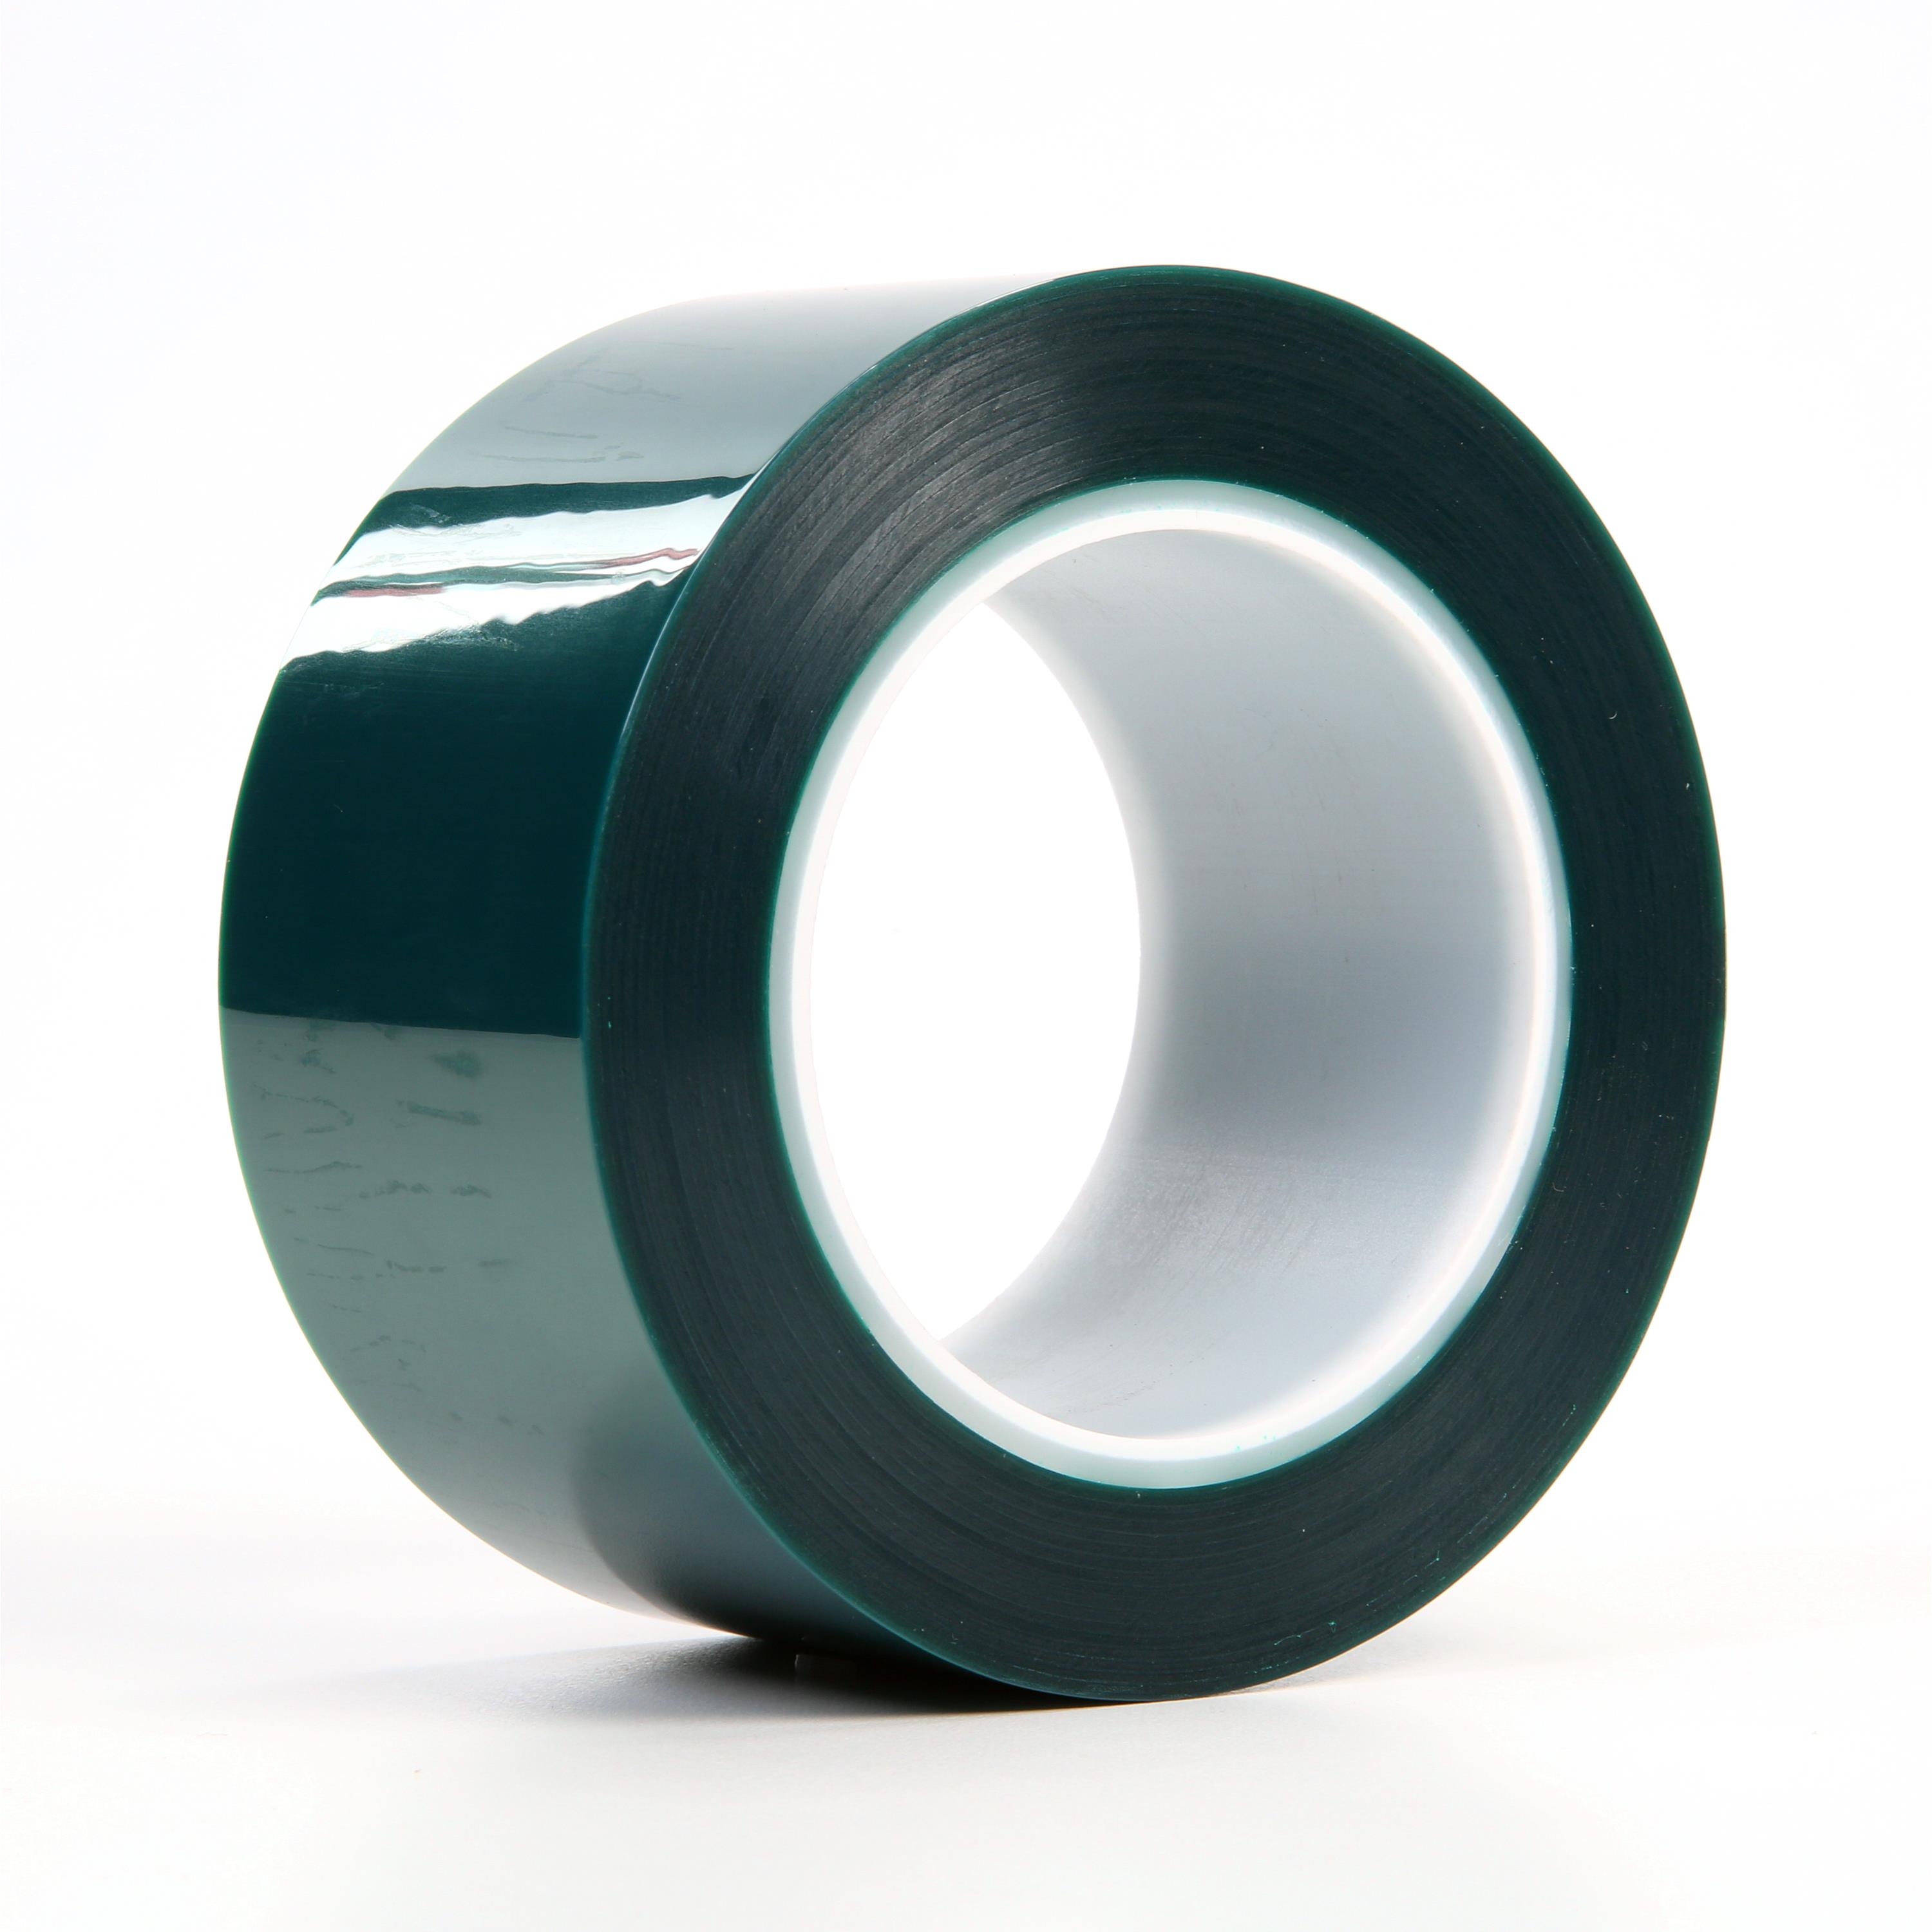 Part # 8992, 3M™ Polyester Tape On Converters, Inc.